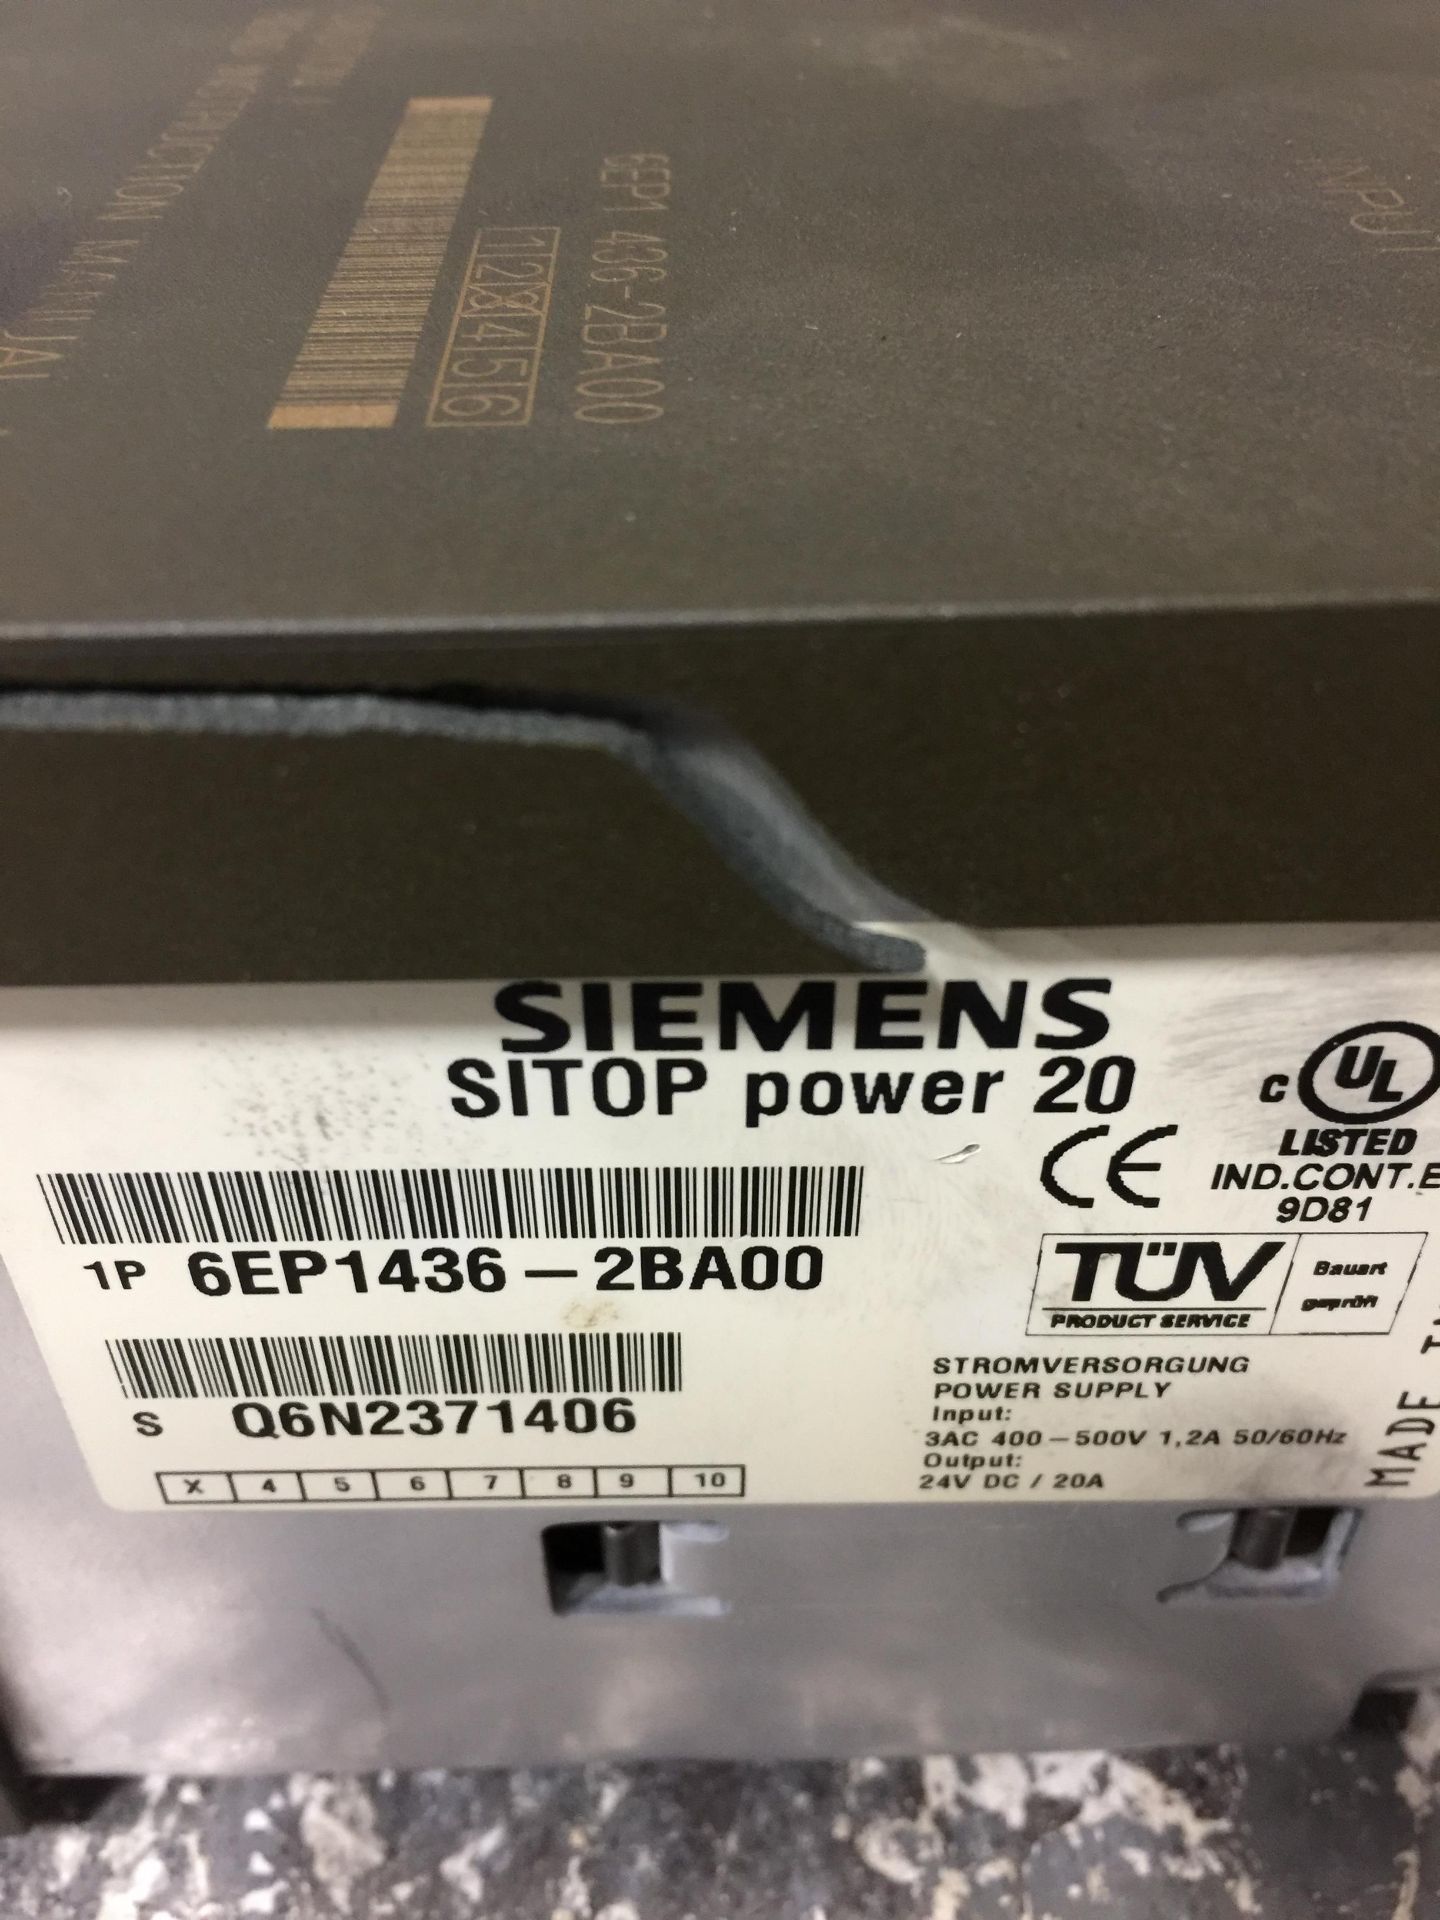 (3) - SIEMENS 6EP1436-2BA00_SITOP POWER 20 POWER SUPPLY - Image 3 of 3